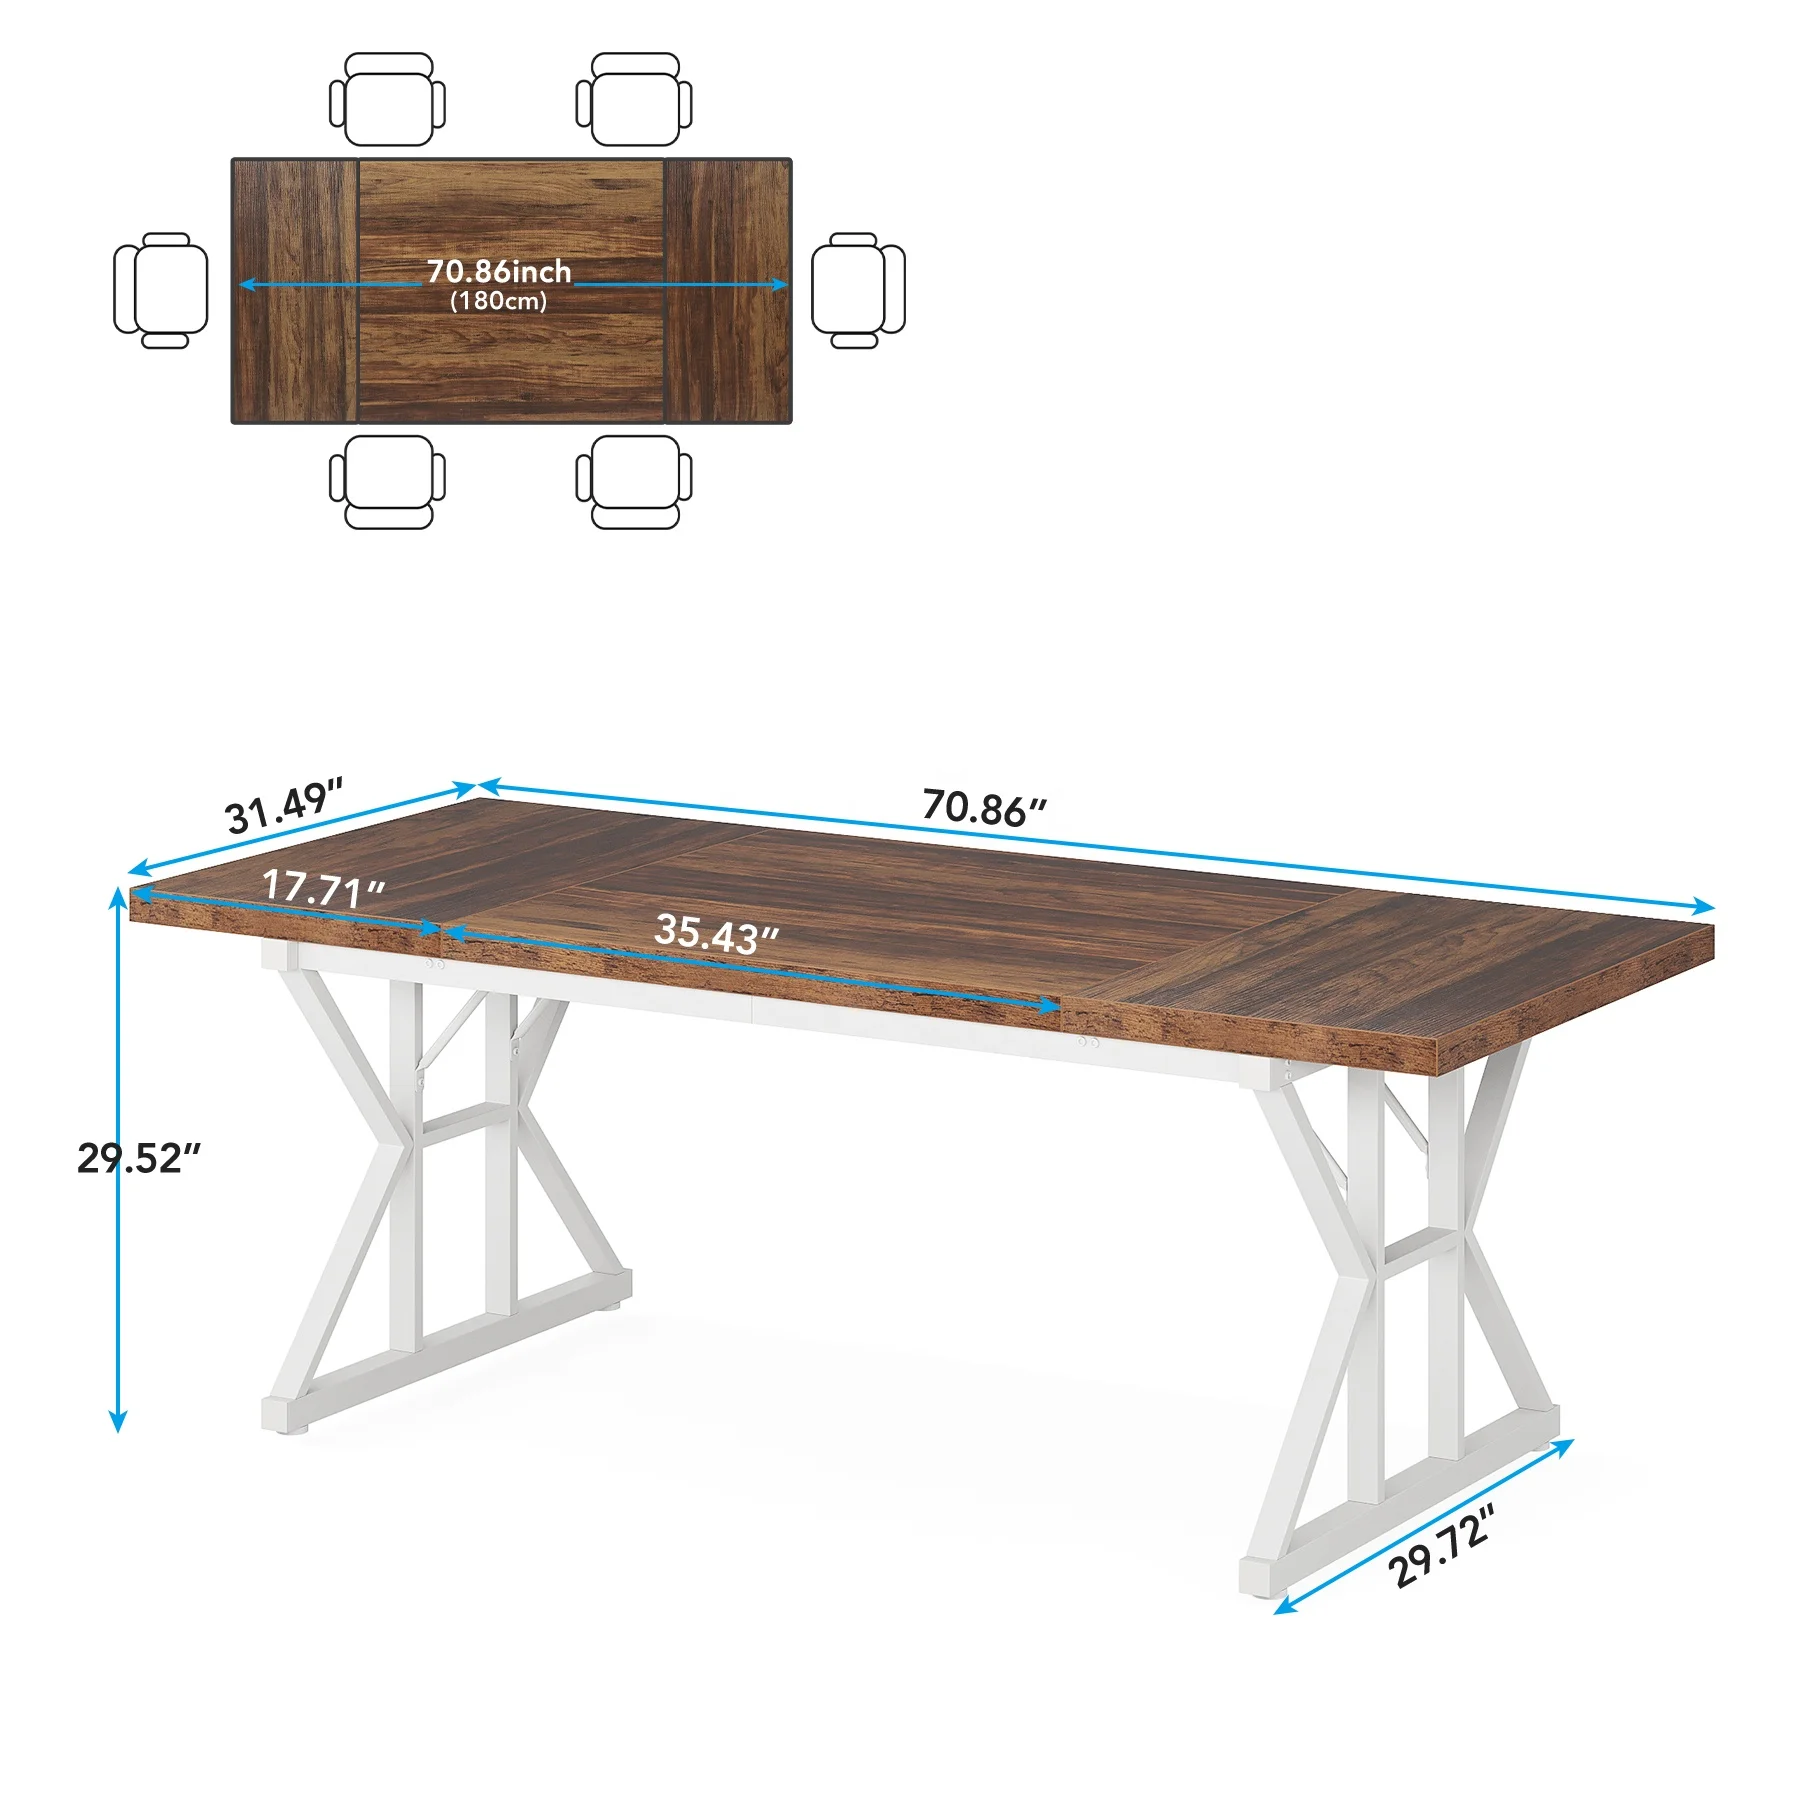 Tribesigns Rectangular Wood Dining Table Rustic Kitchen Table with Heavy Duty Metal Legs Farmhouse Restaurant Dining Table for 8